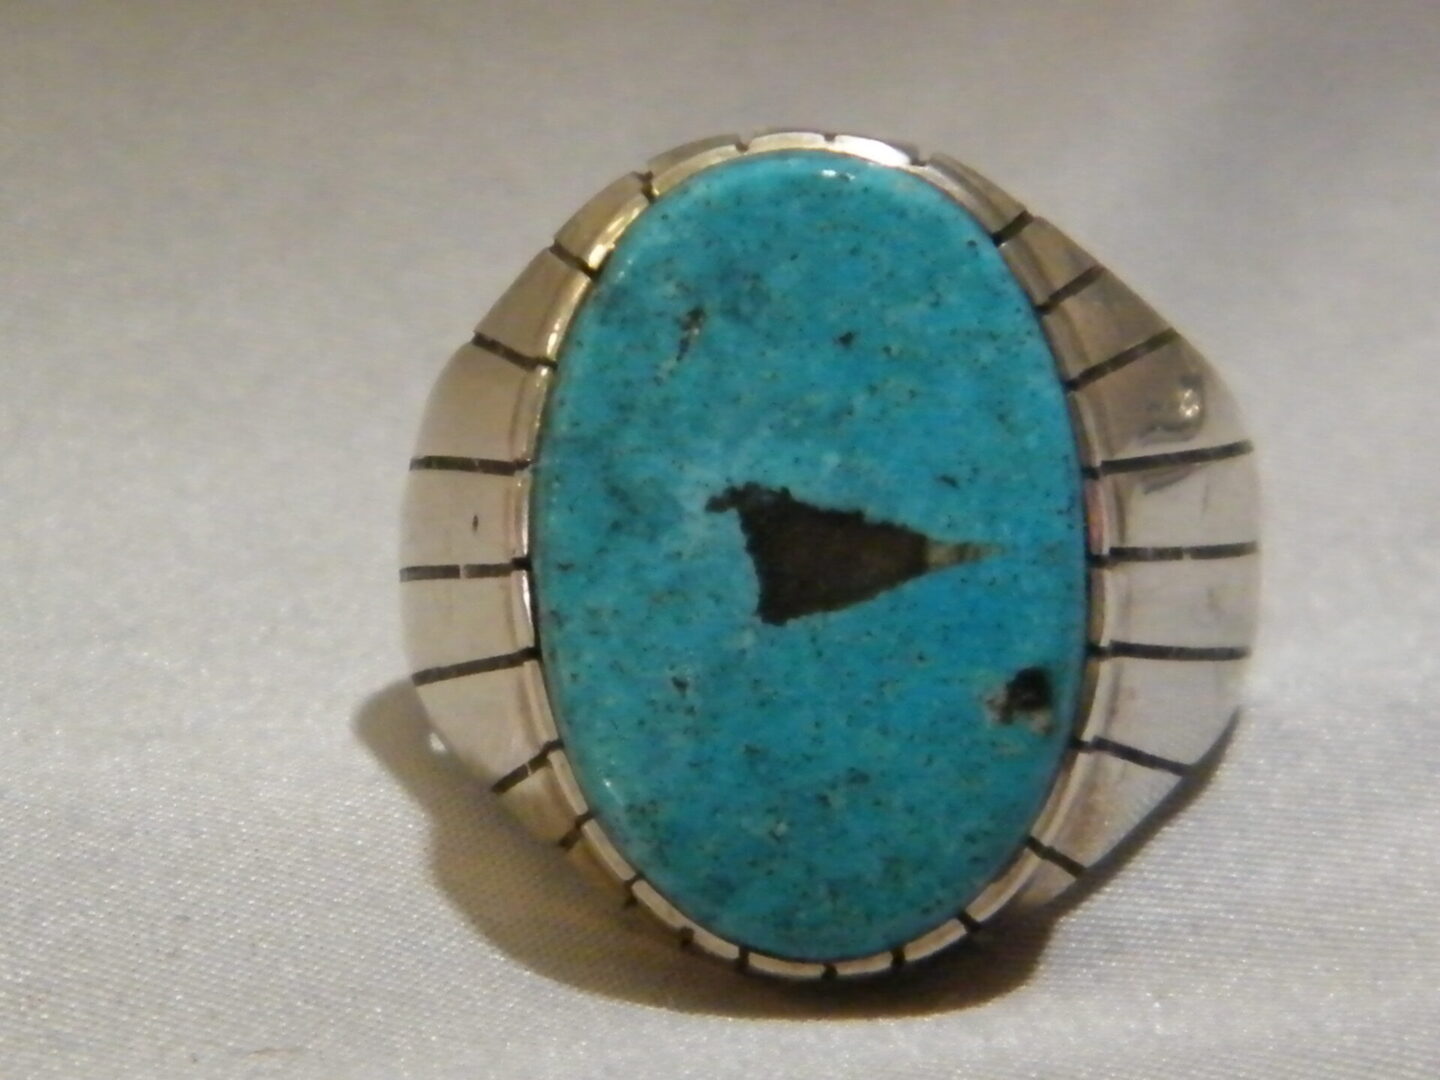 An Oval Shape Turquoise Stone With Sterling Silver